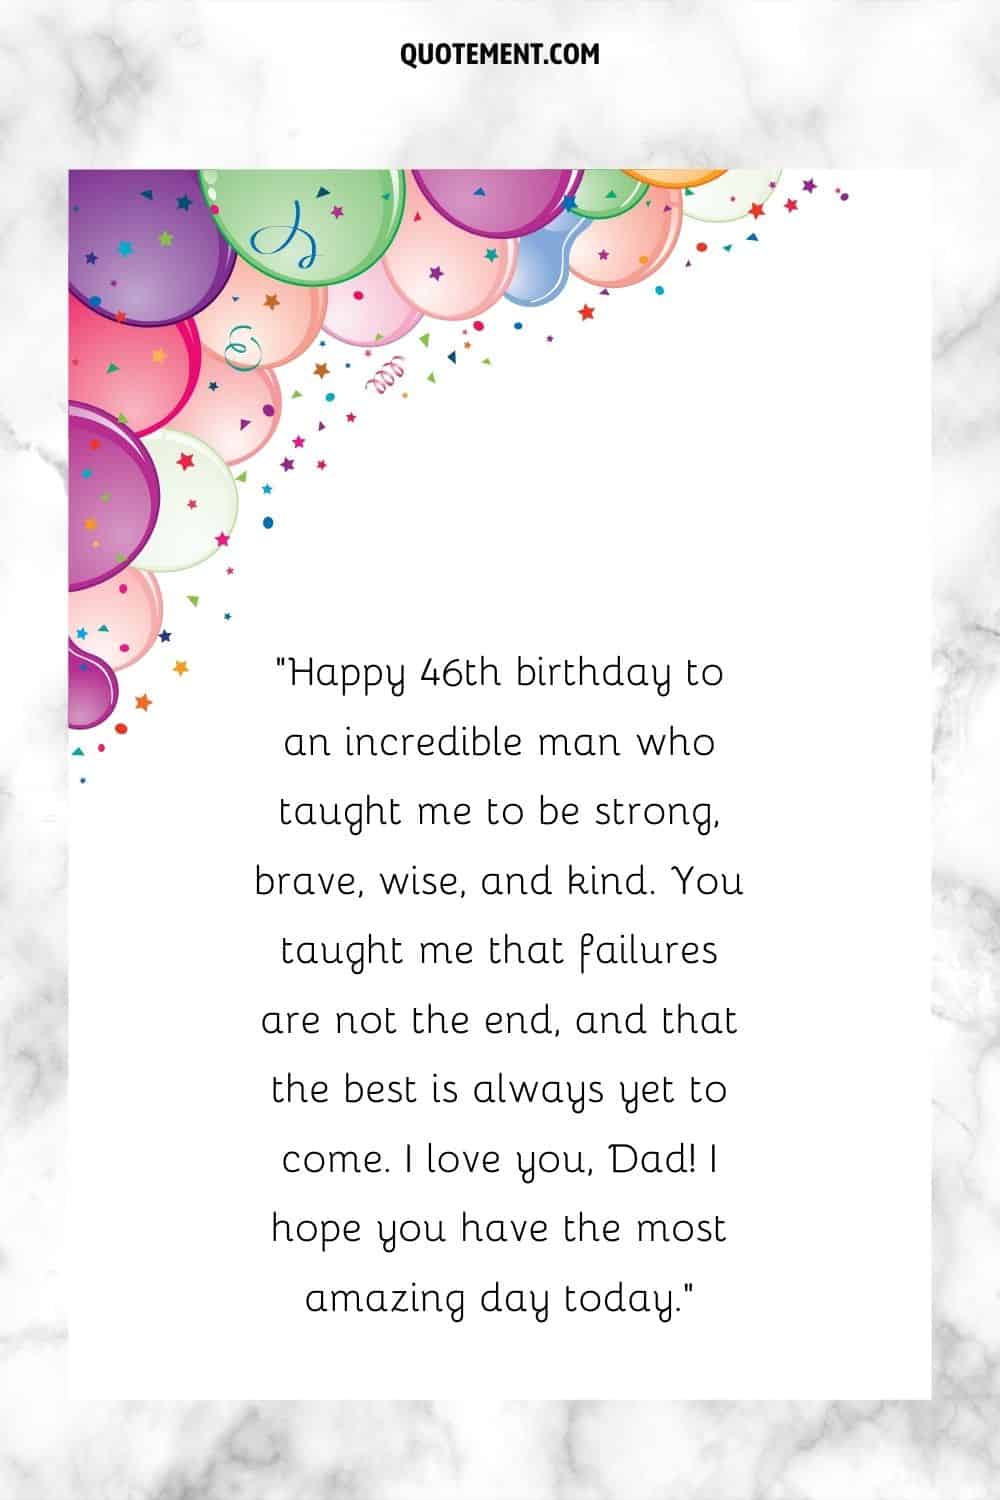 Birthday message for a dad's 46th birthday and balloons